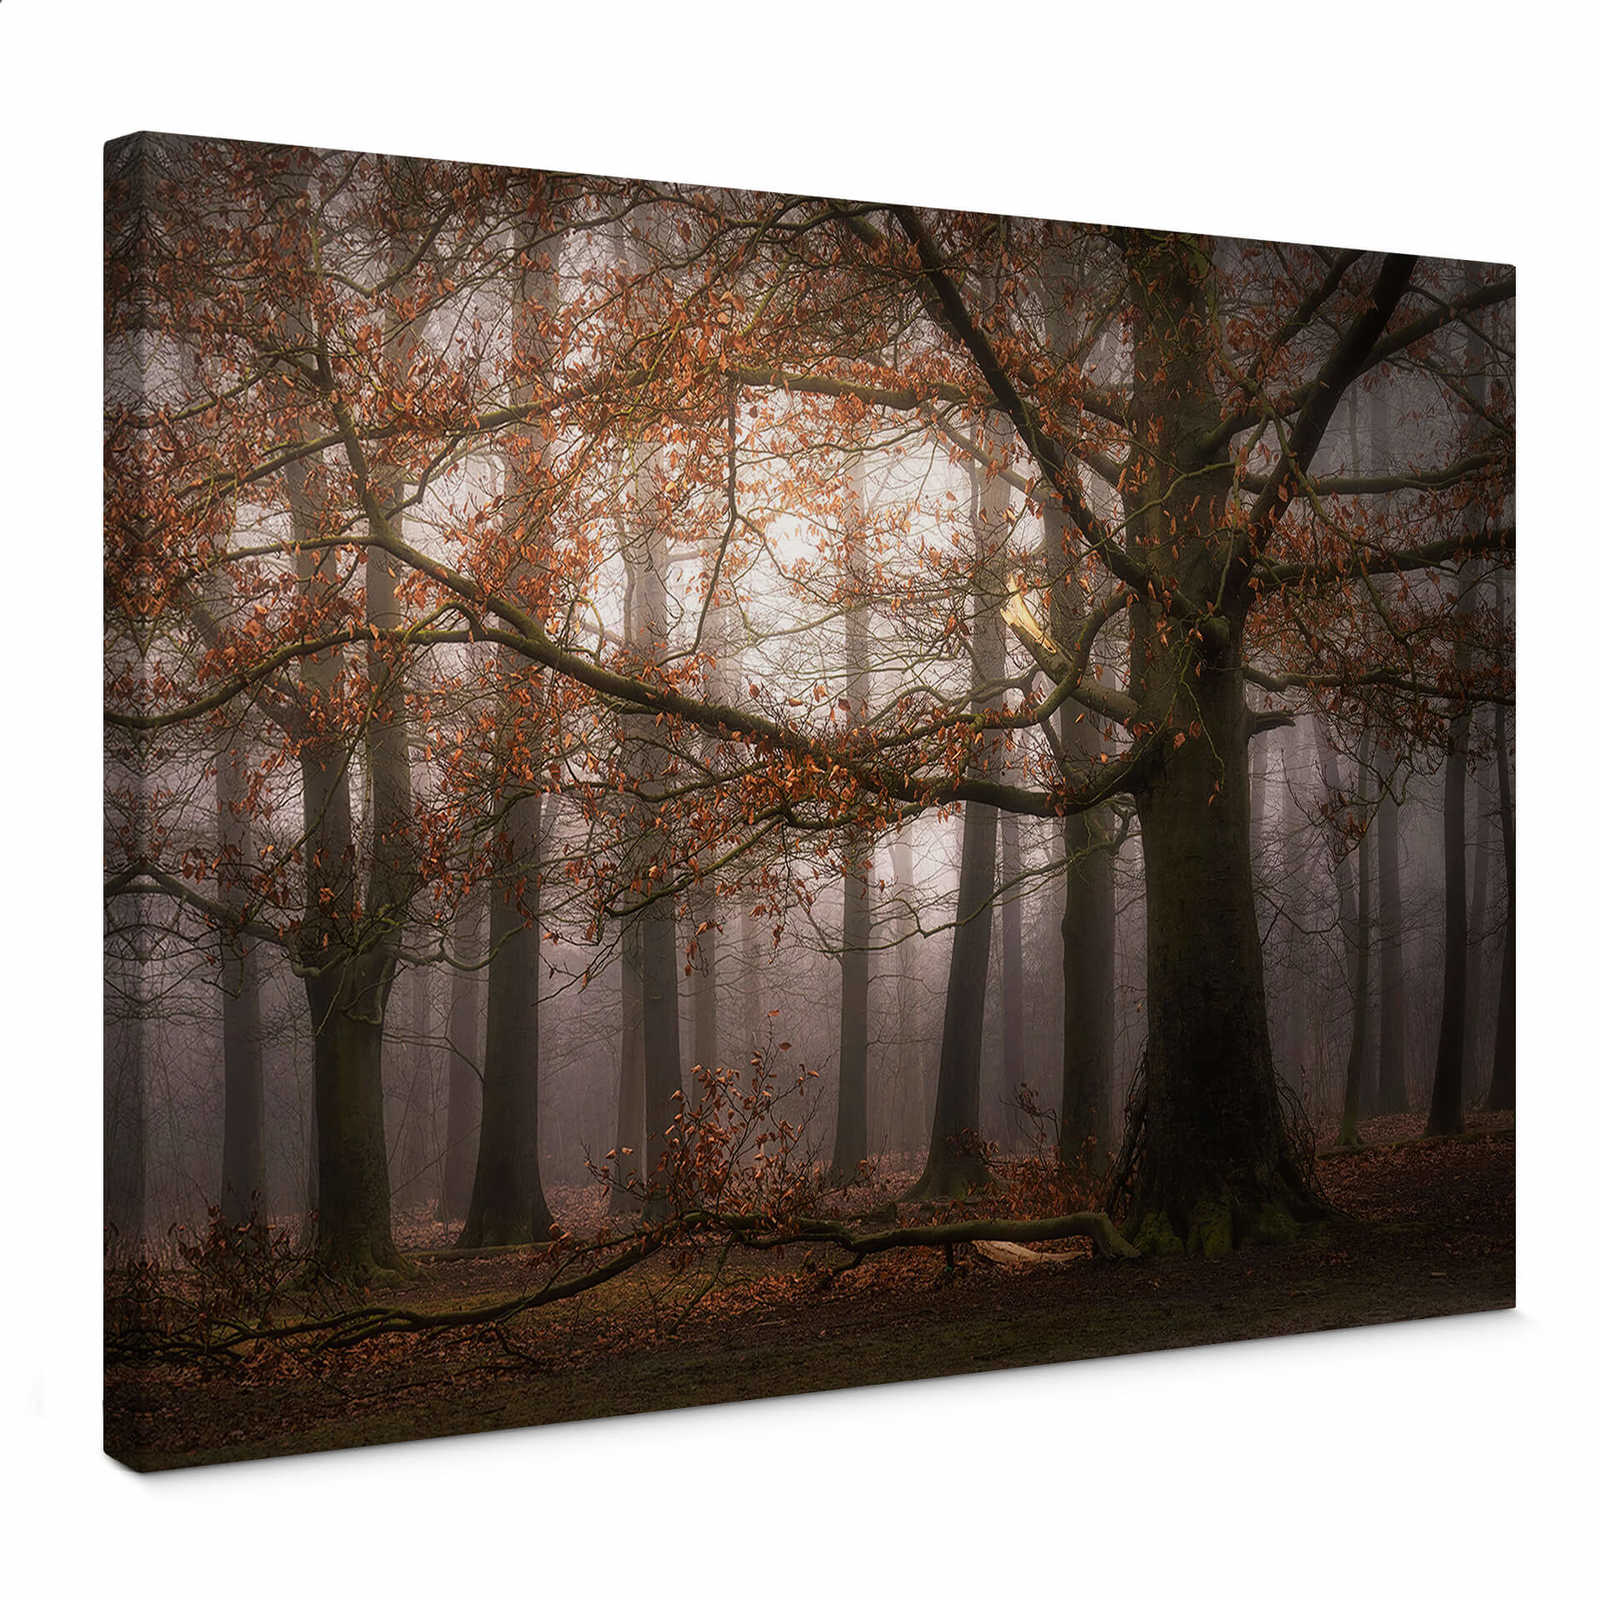 Canvas print with leafy forest in november by Digemans
